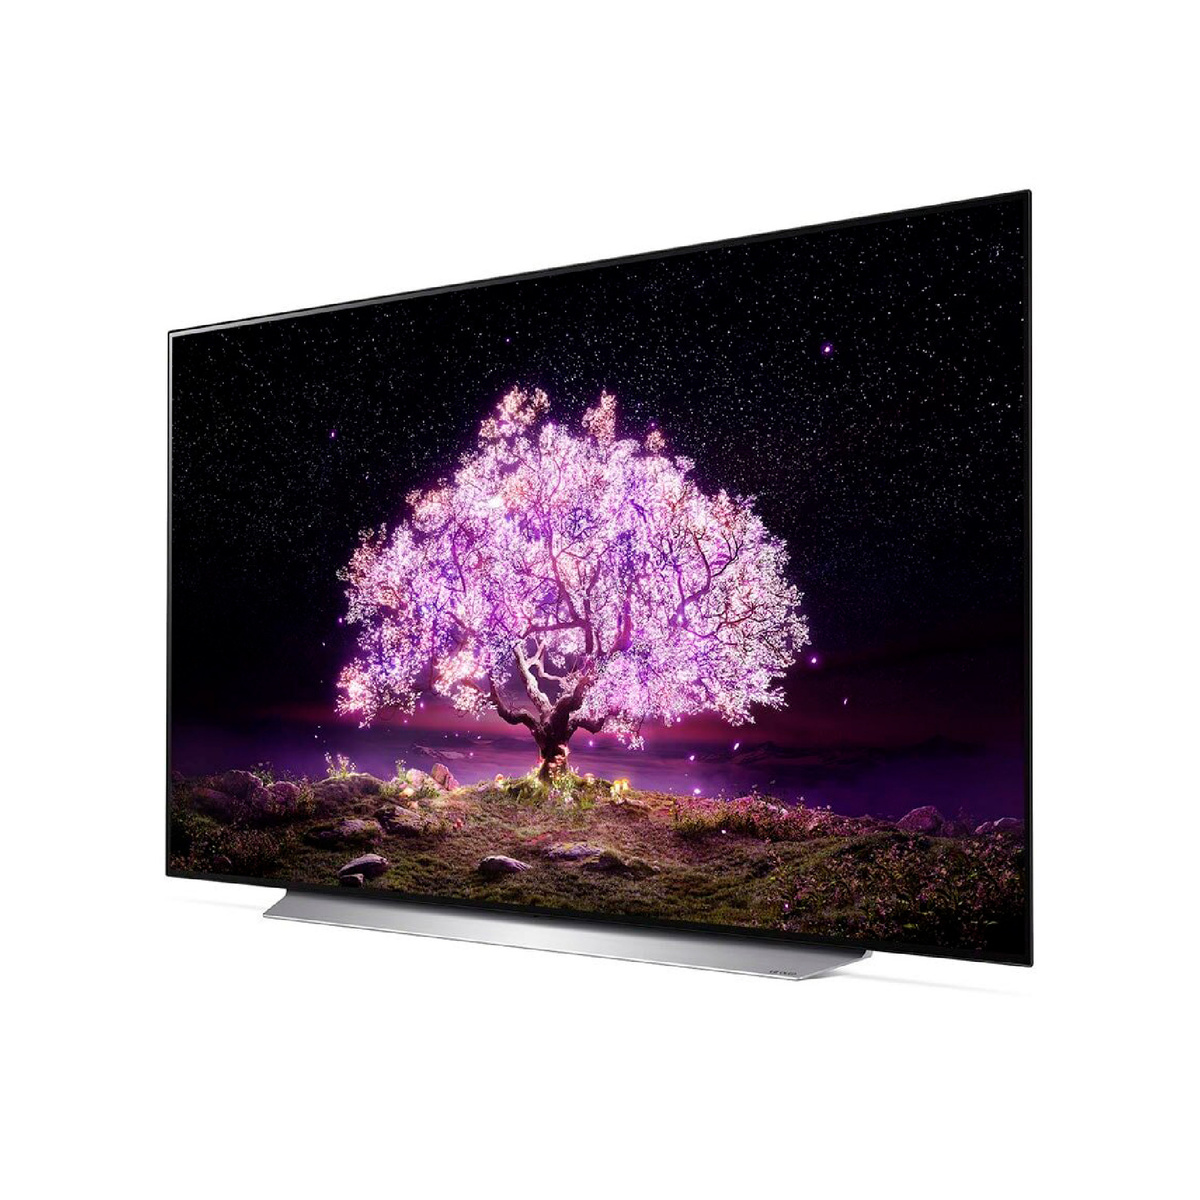 LG OLED 4K Smart TV 65Inch C1 Series Cinema Screen Design, New 2021 4K Cinema HDR webOS Smart with ThinQ AI Pixel Dimming